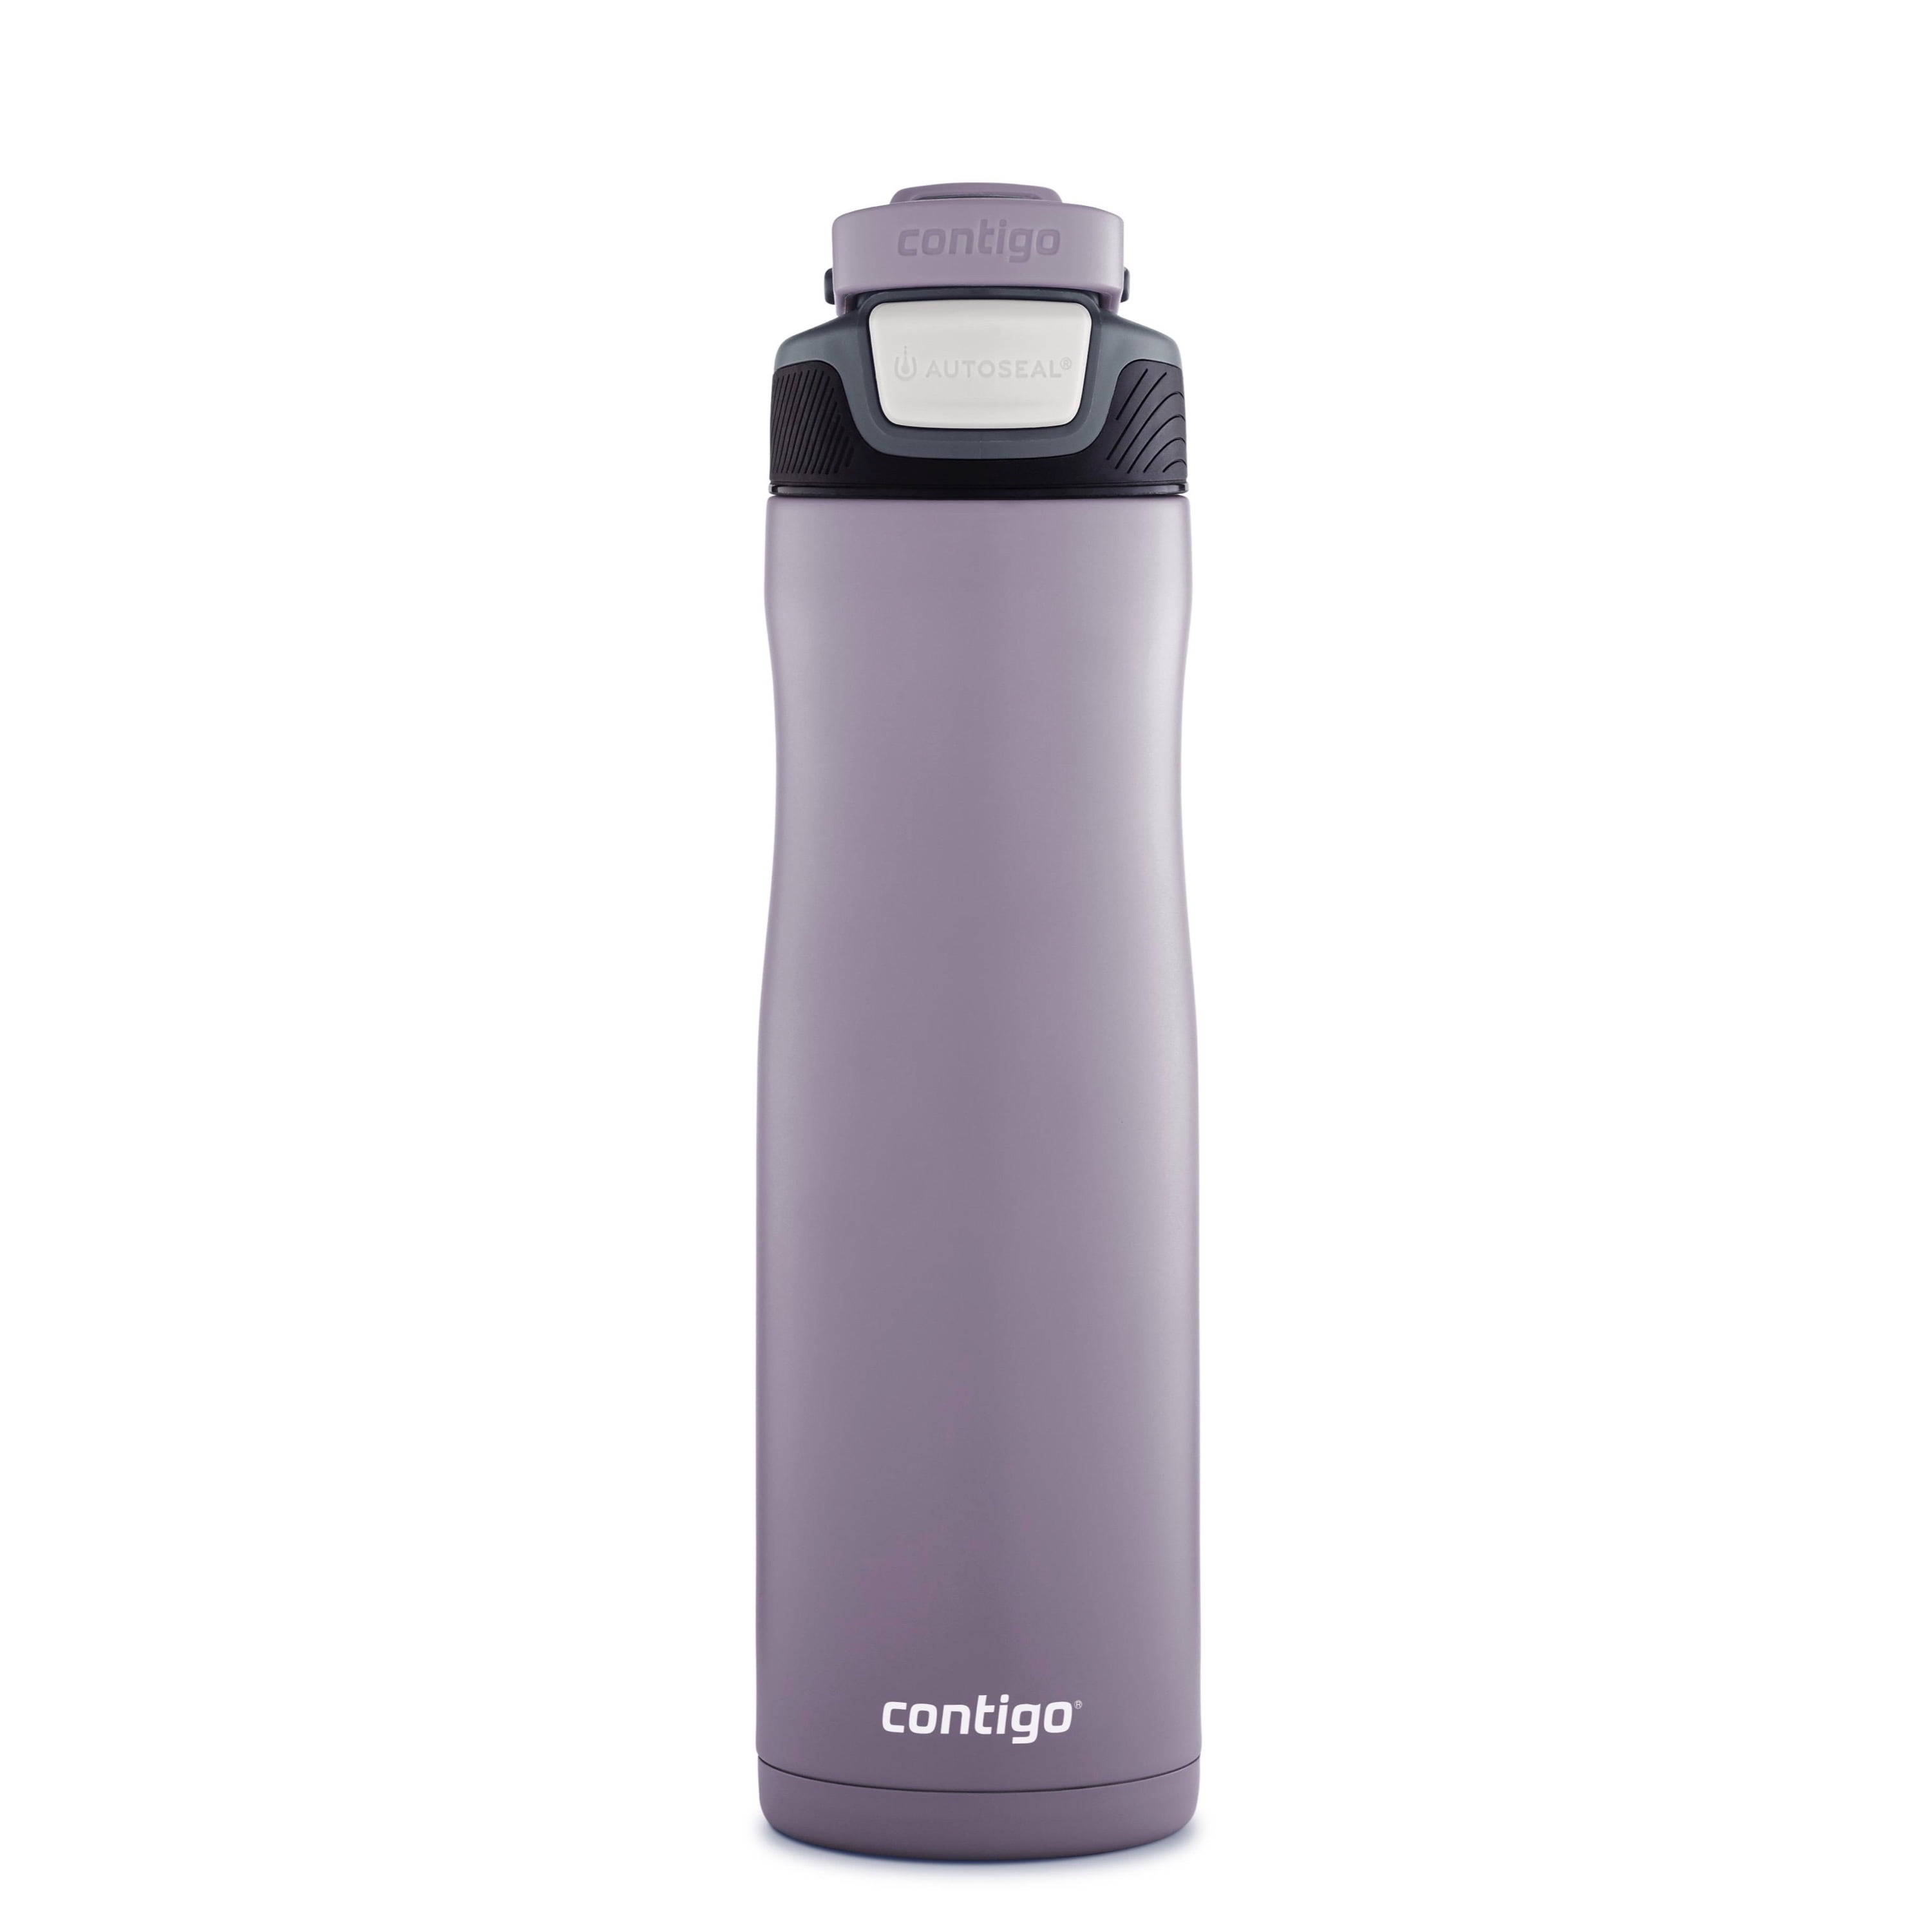 24 oz Stainless Steel Insulated Water Bottle - Purple - McClumsy